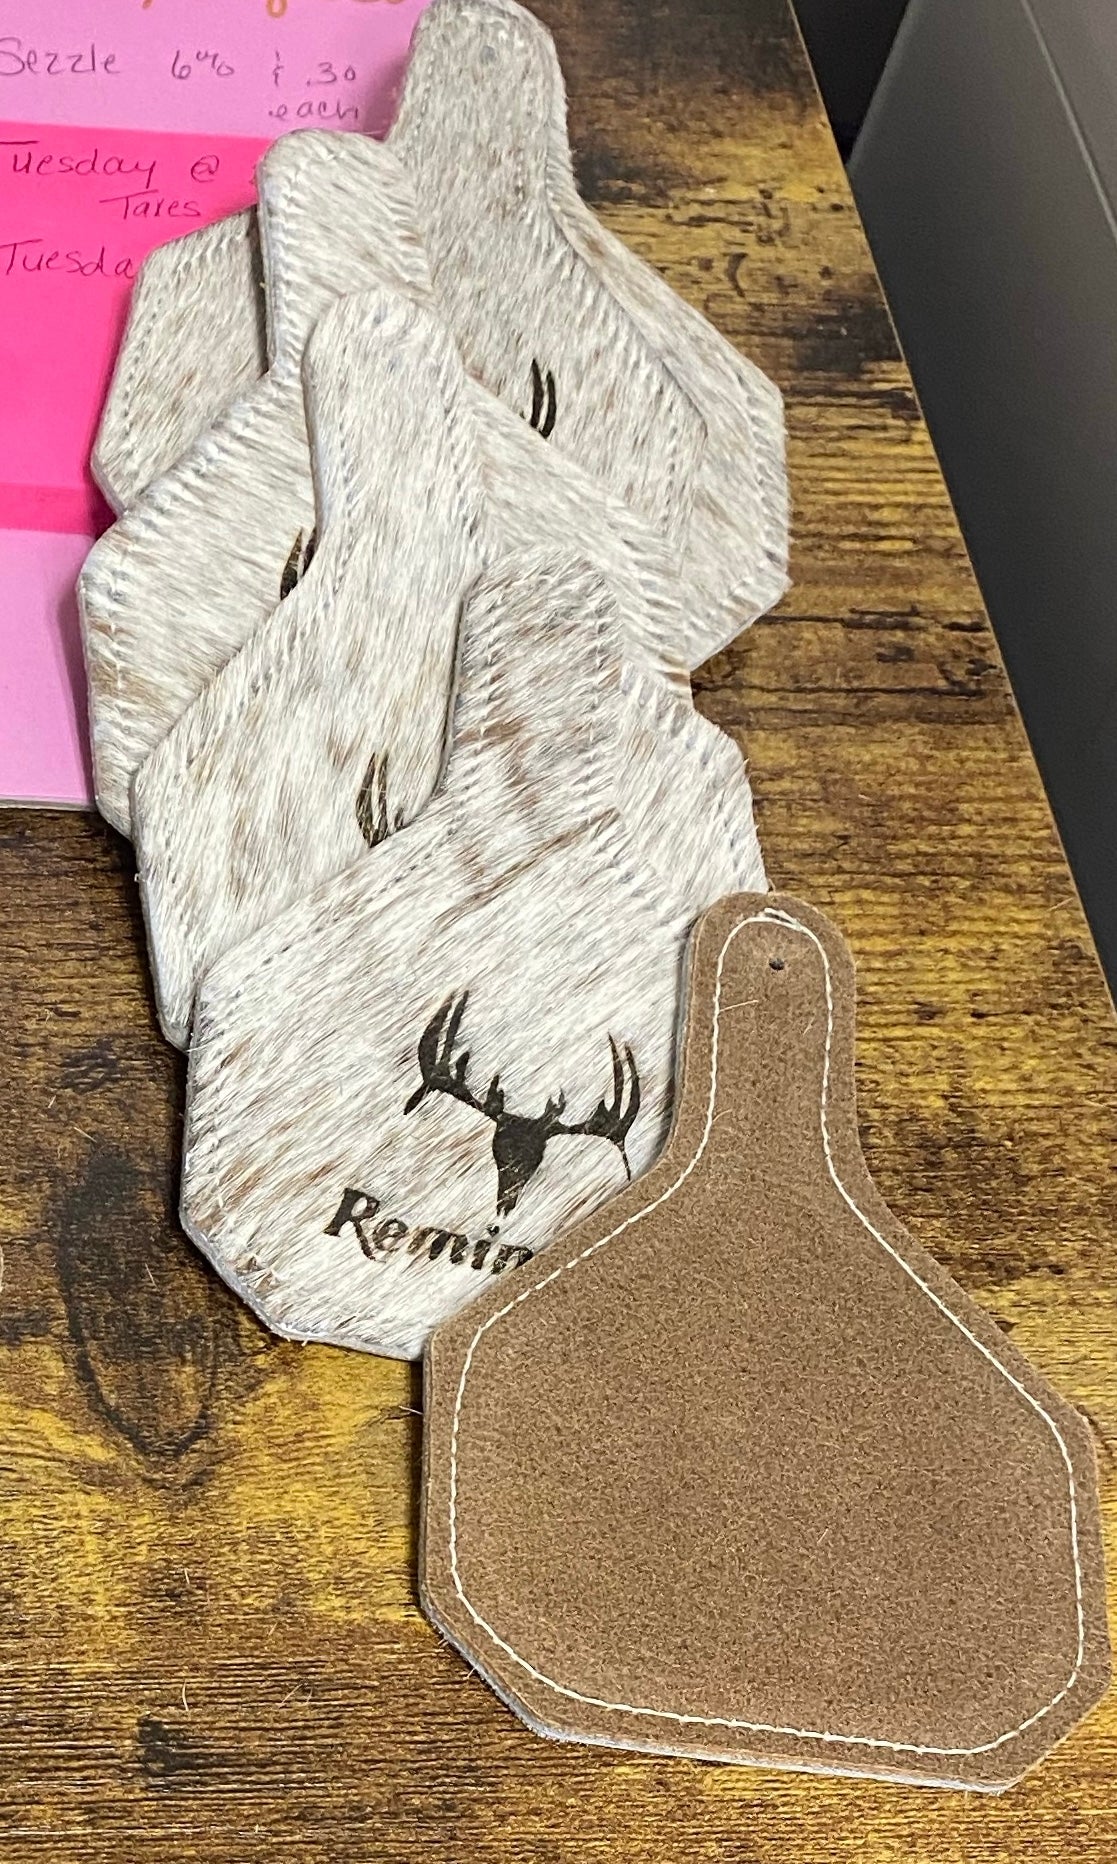 re-SCENTit Leather / Hair on Hide Car Fresheners